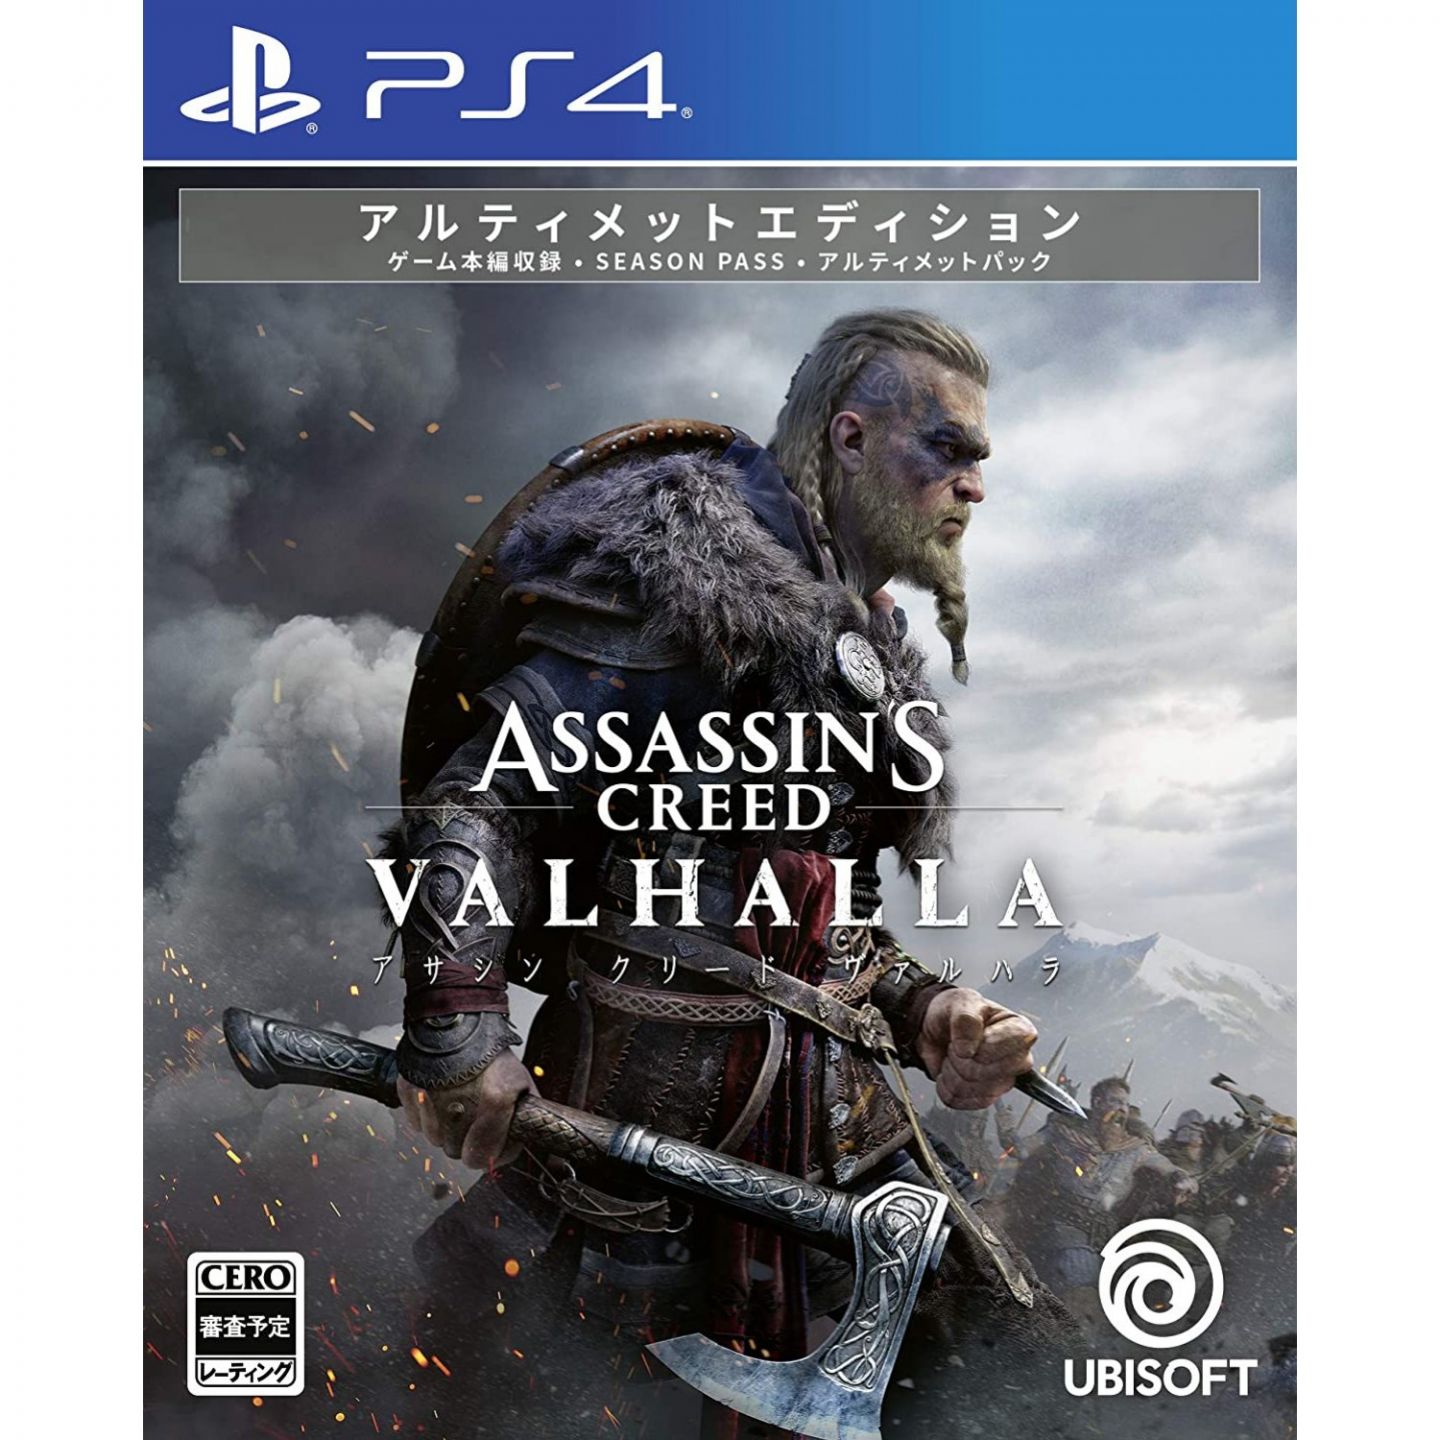 Ps4 ultimate edition. Assassin's Creed Valhalla ps4. Вальгалла ps4. Assassin's Creed Вальгалла диск ПС 4. Assassins Creed Valhalla complete Edition ps4.